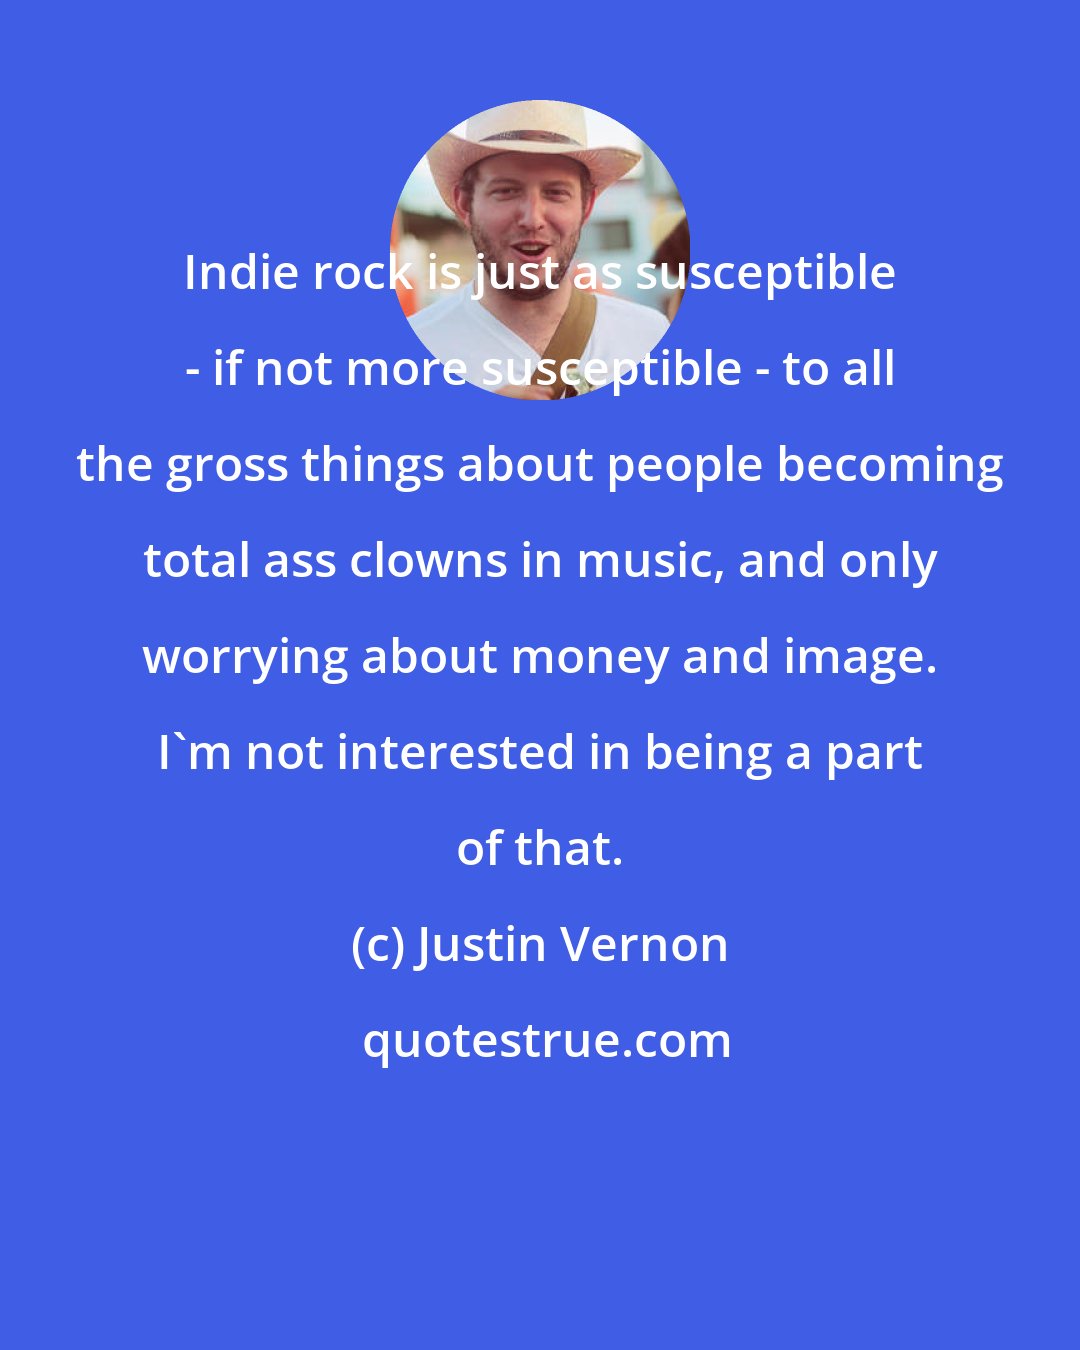 Justin Vernon: Indie rock is just as susceptible - if not more susceptible - to all the gross things about people becoming total ass clowns in music, and only worrying about money and image. I'm not interested in being a part of that.